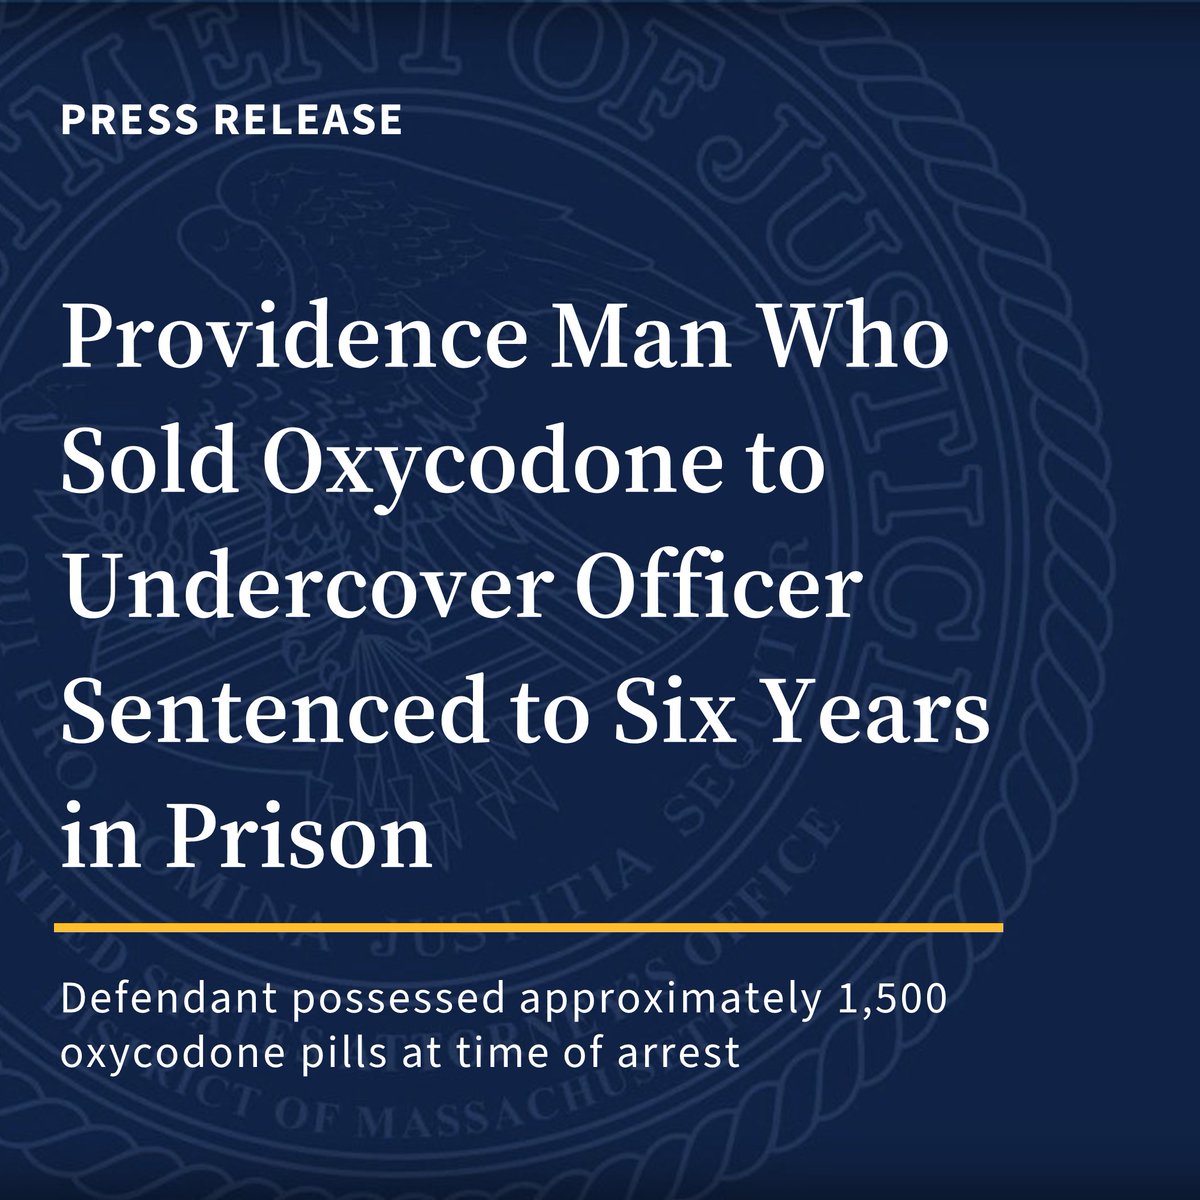 A Providence man who sold oxycodone to an undercover officer sentenced to 6 years in prison. At the time of his arrest, the defendant was in possession of approximately 1,500 oxycodone pills. 🔗justice.gov/usao-ma/pr/pro…